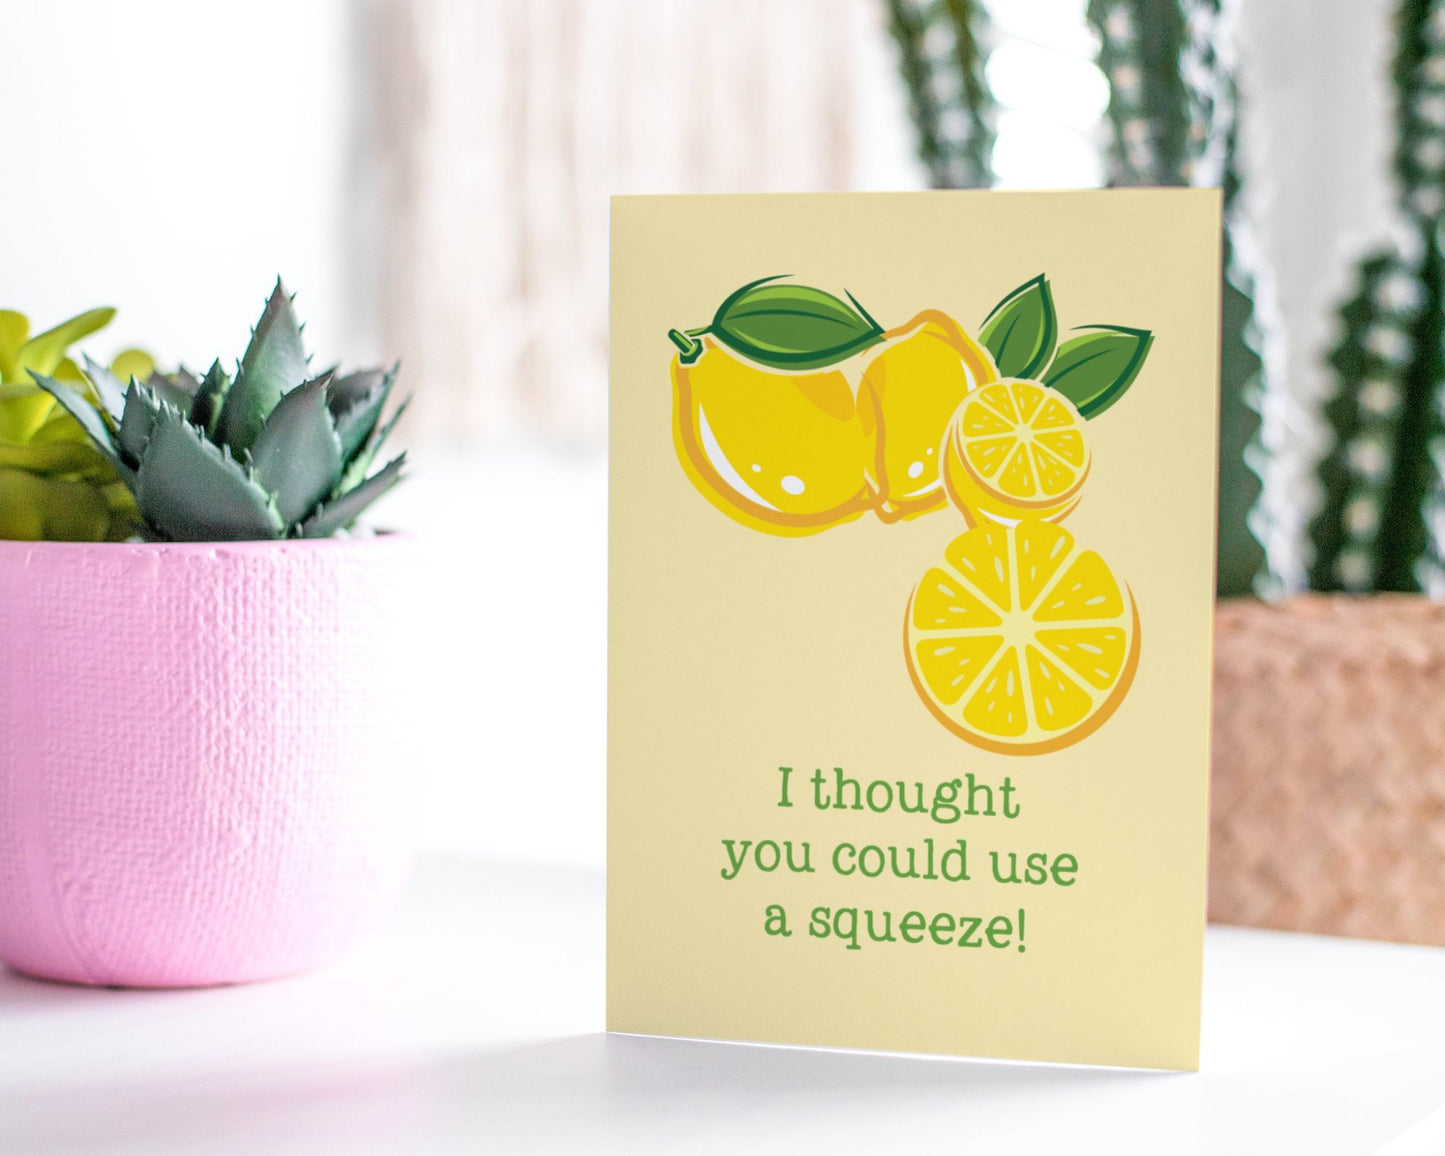 I Thought You Could Use A Squeeze! - Thinking Of You Greeting Card - Lemons/ Lemonade.